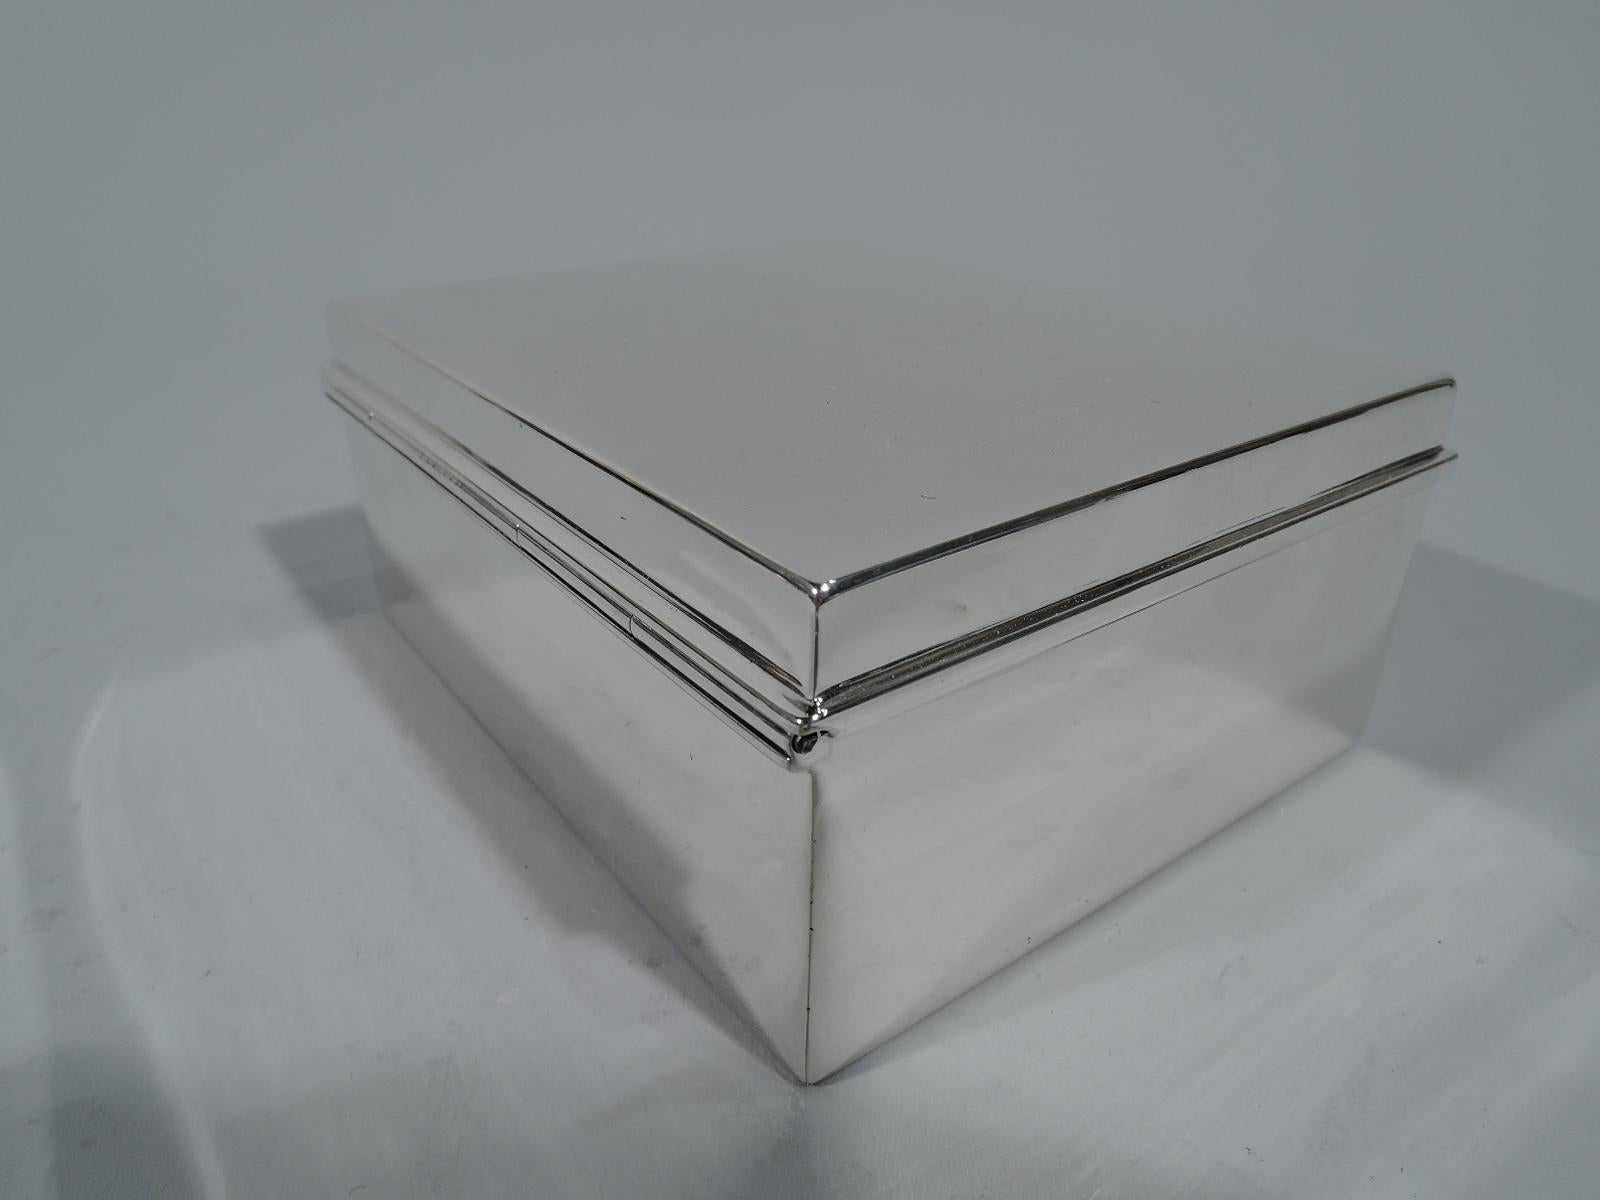 Modern sterling silver desk box. Made by Tiffany & Co. in New York. Rectangular with straight sides. Cover flat and hinged with molded rim. Box interior cedar-lined. Cover interior gilt. Hallmark includes pattern no. 22355, director’s letter m